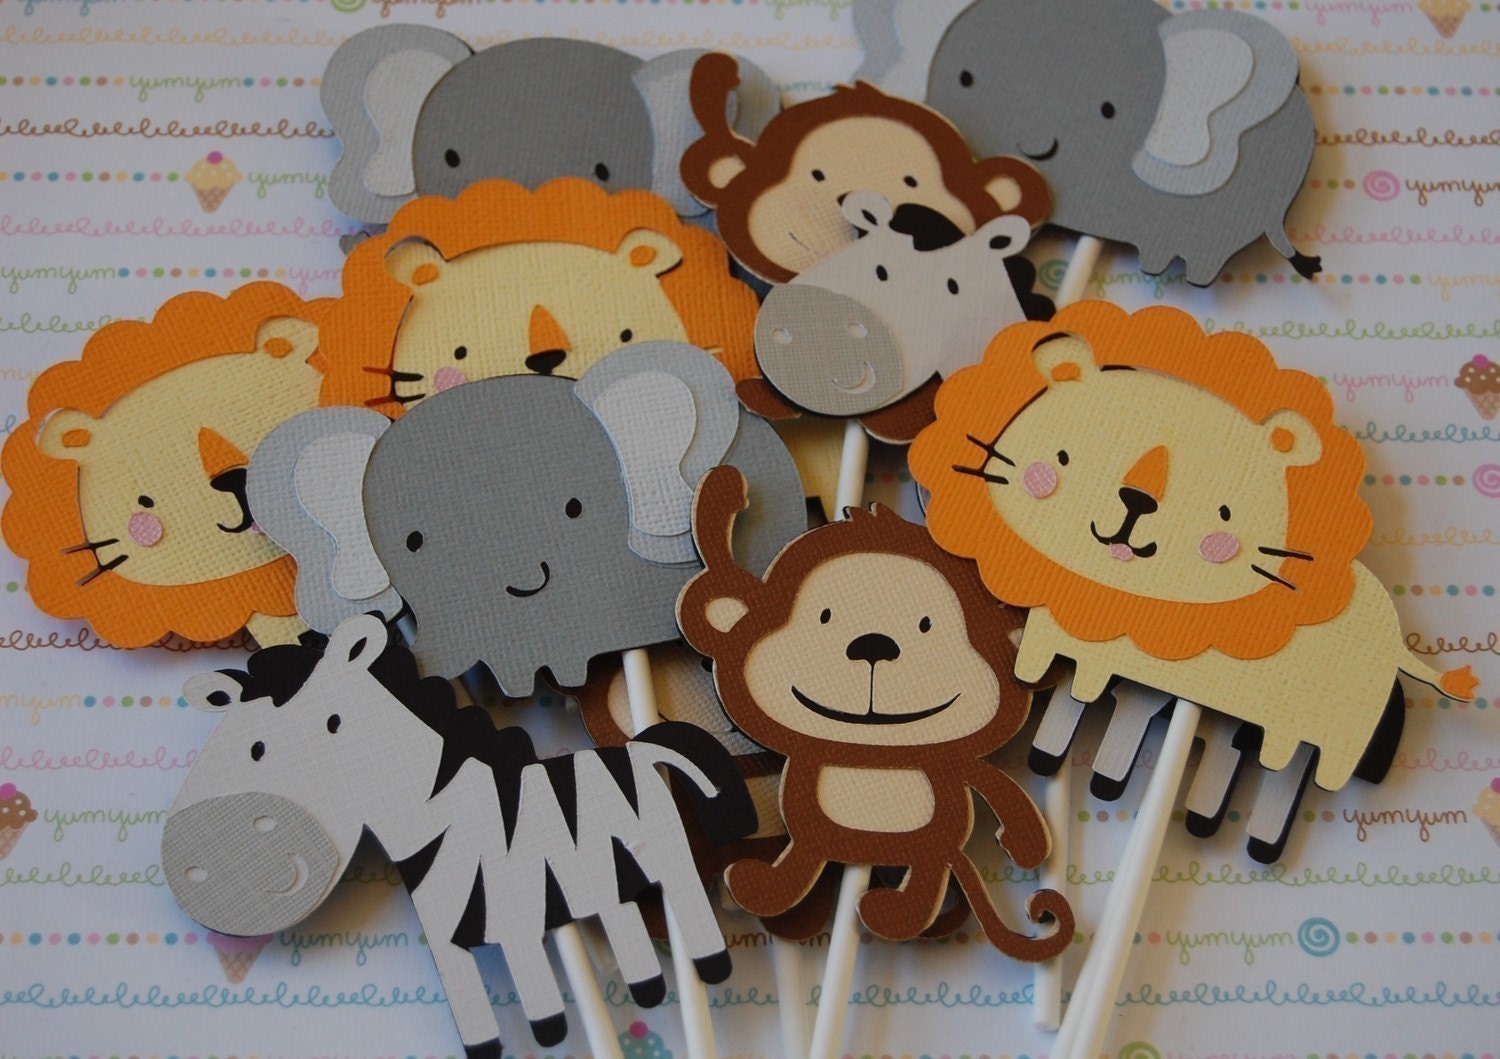 SAFARI Animal Cupcake Toppers by ajzdelights on Etsy